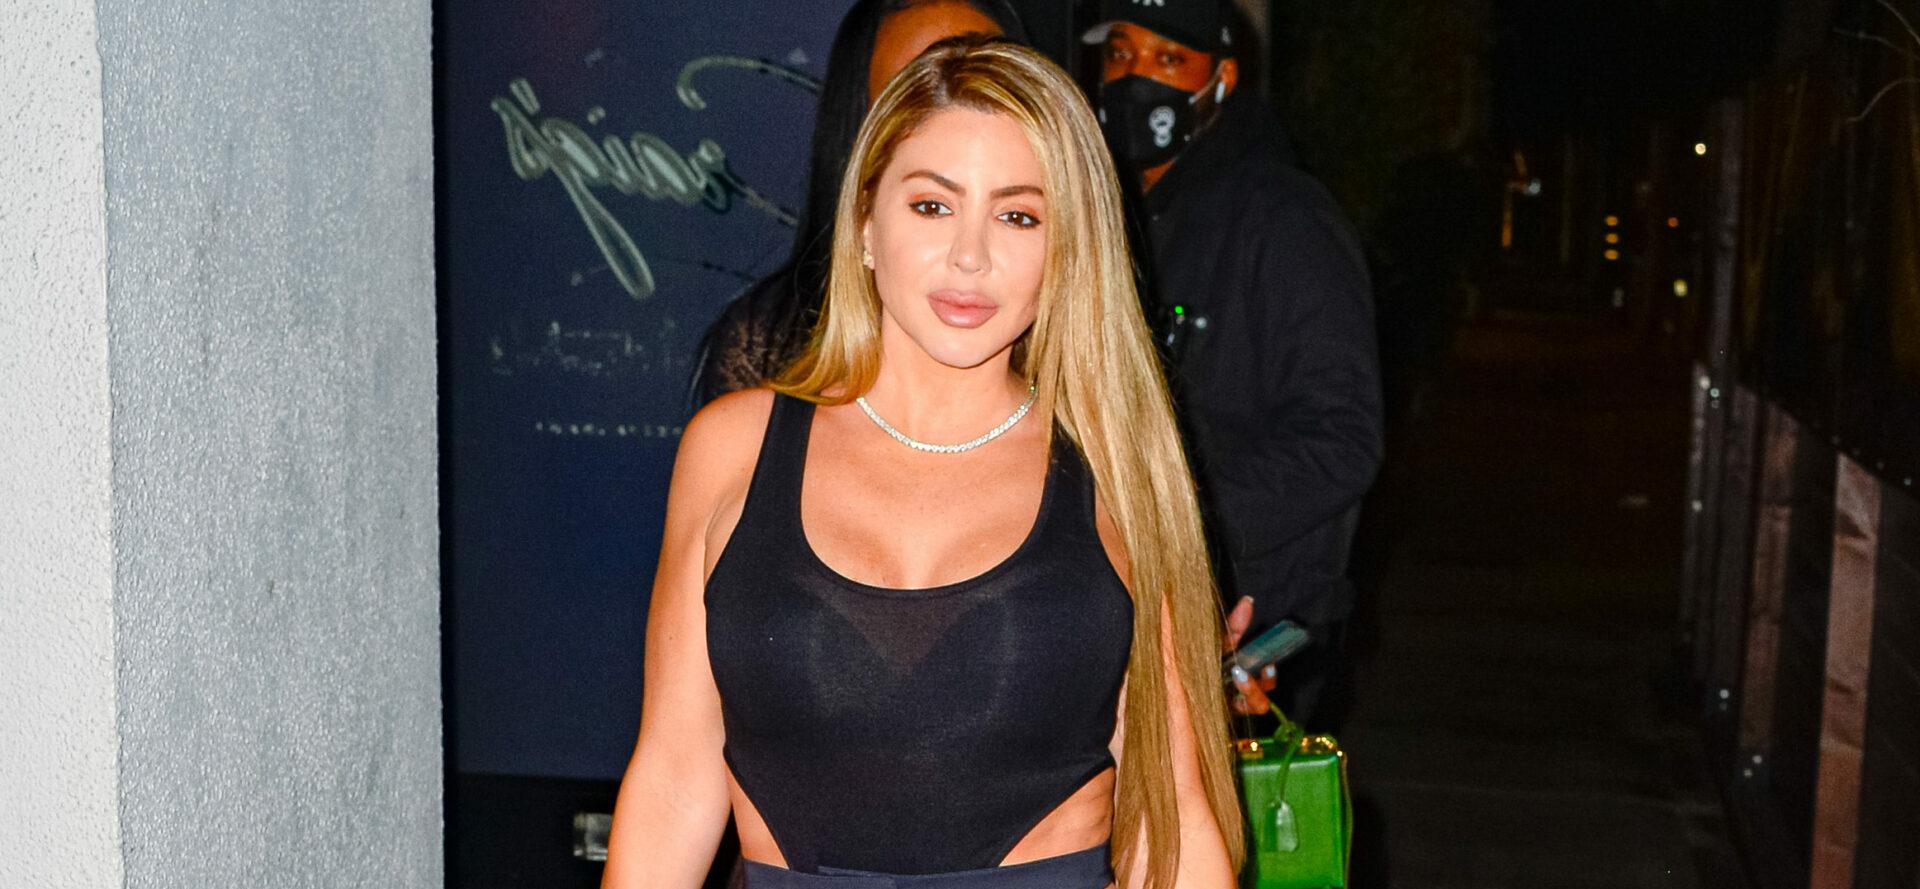 Larsa Pippen Gushes Over Scott Disick: ‘He’s Got The Best Personality’